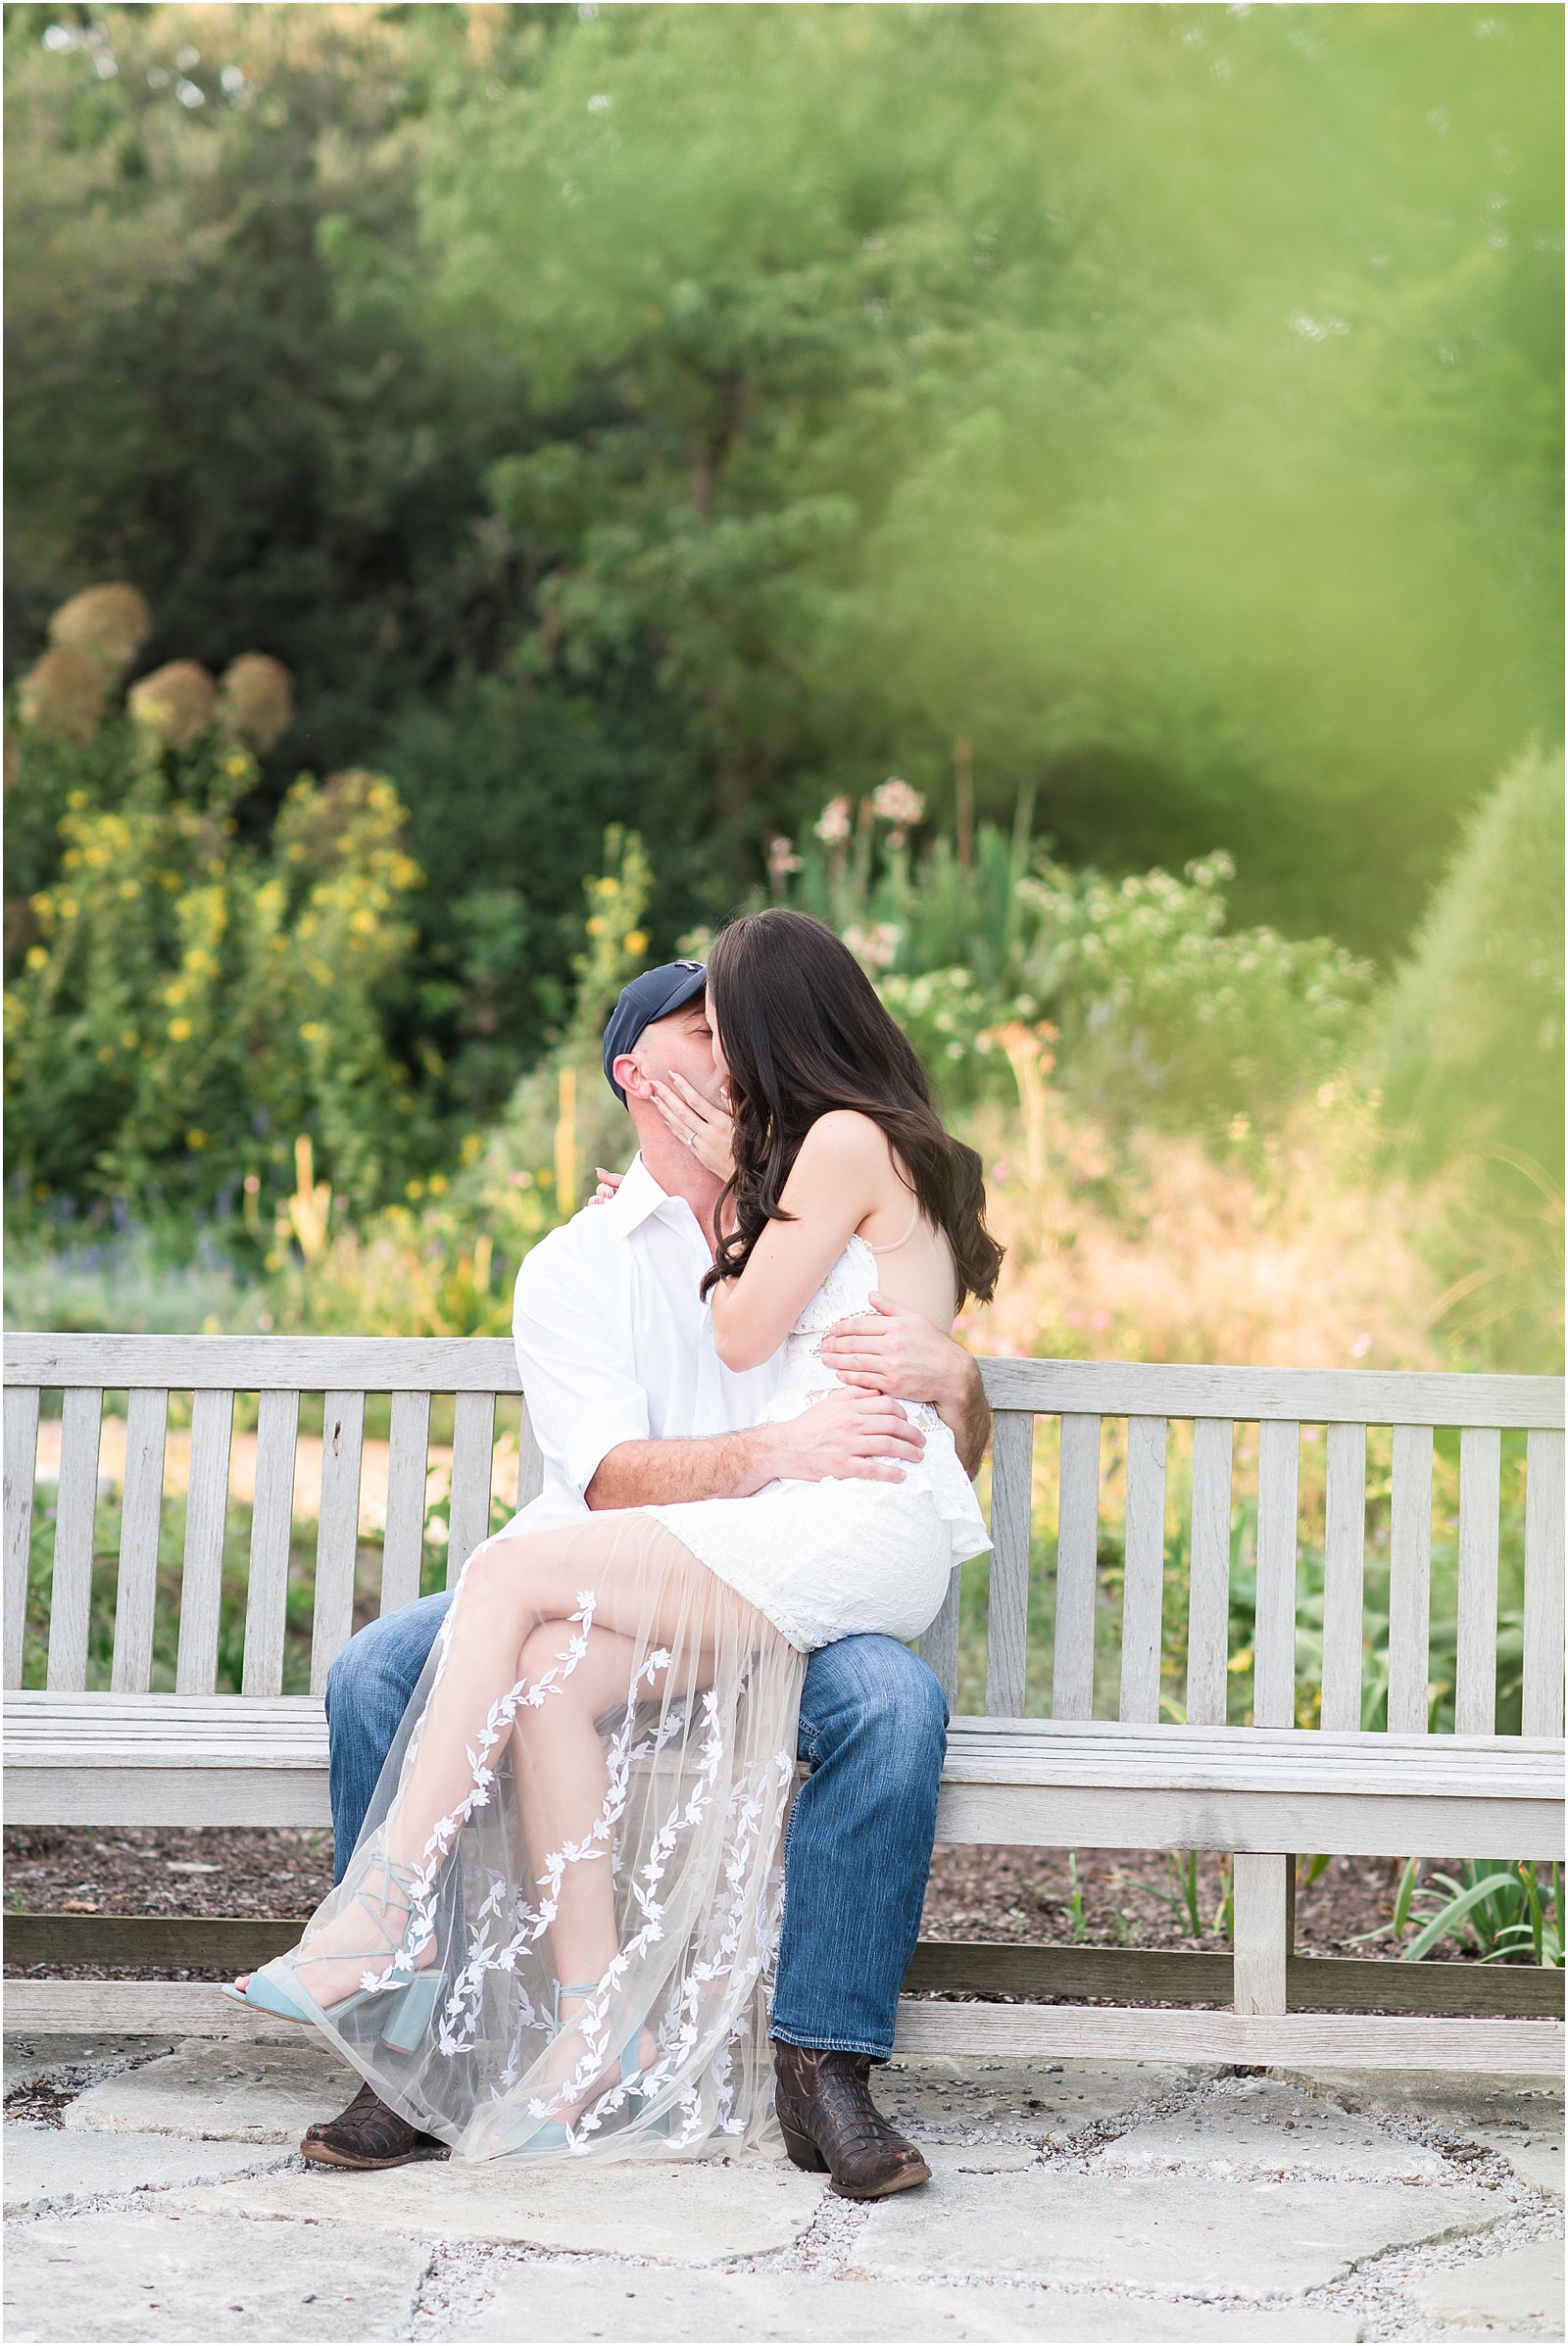 a woman wearing a white dress with dusty blue heels sitting on a man wearing a white shirt with dark blue jeans lap giving him a kiss at JC Raulston Arboretum